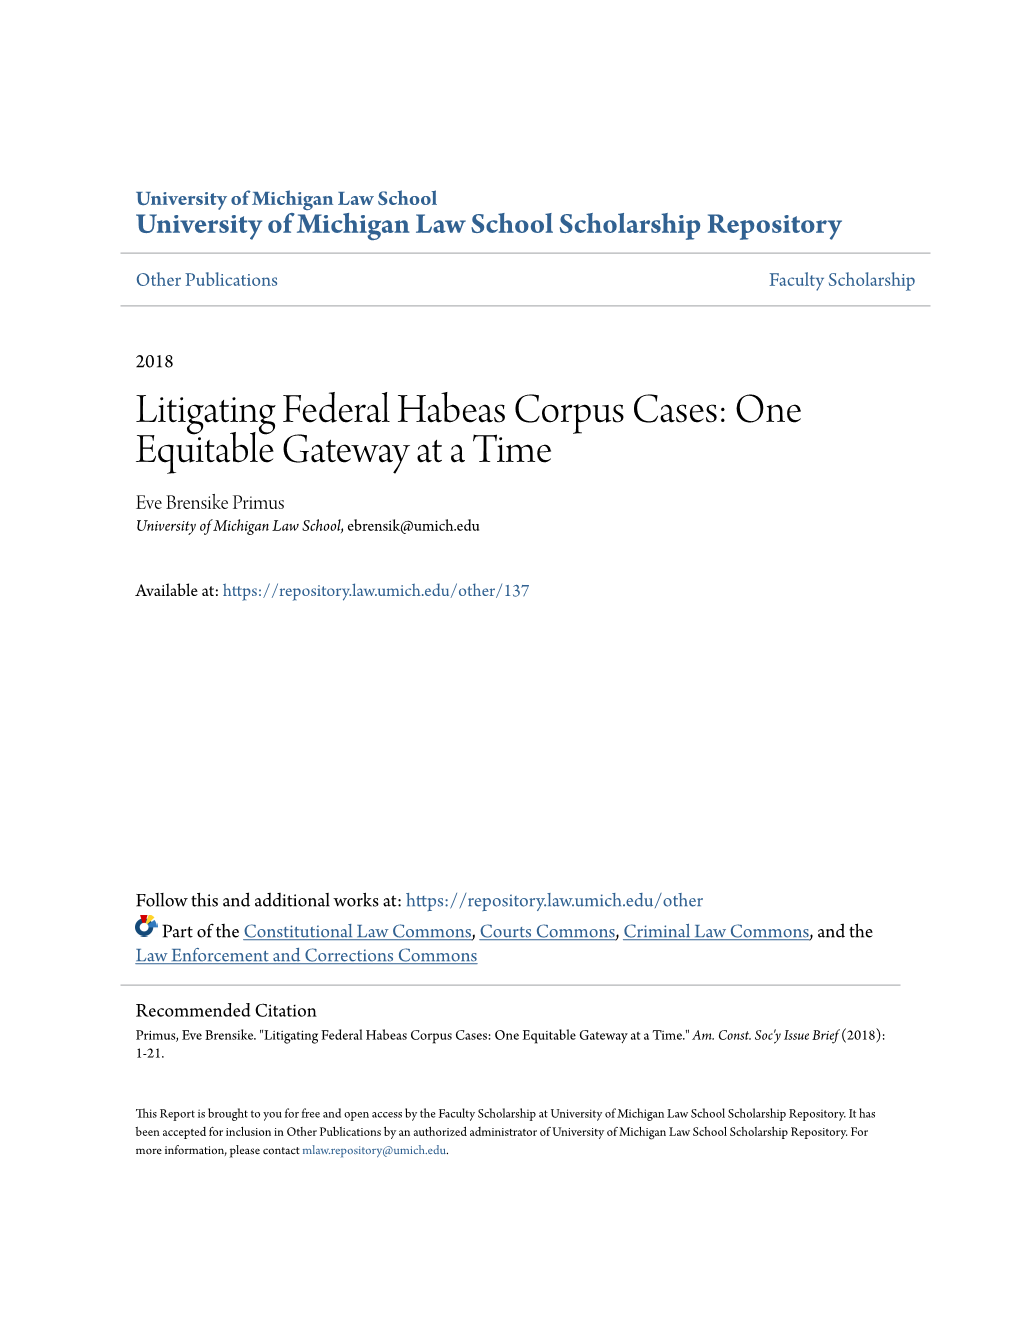 Litigating Federal Habeas Corpus Cases: One Equitable Gateway at a Time Eve Brensike Primus University of Michigan Law School, Ebrensik@Umich.Edu